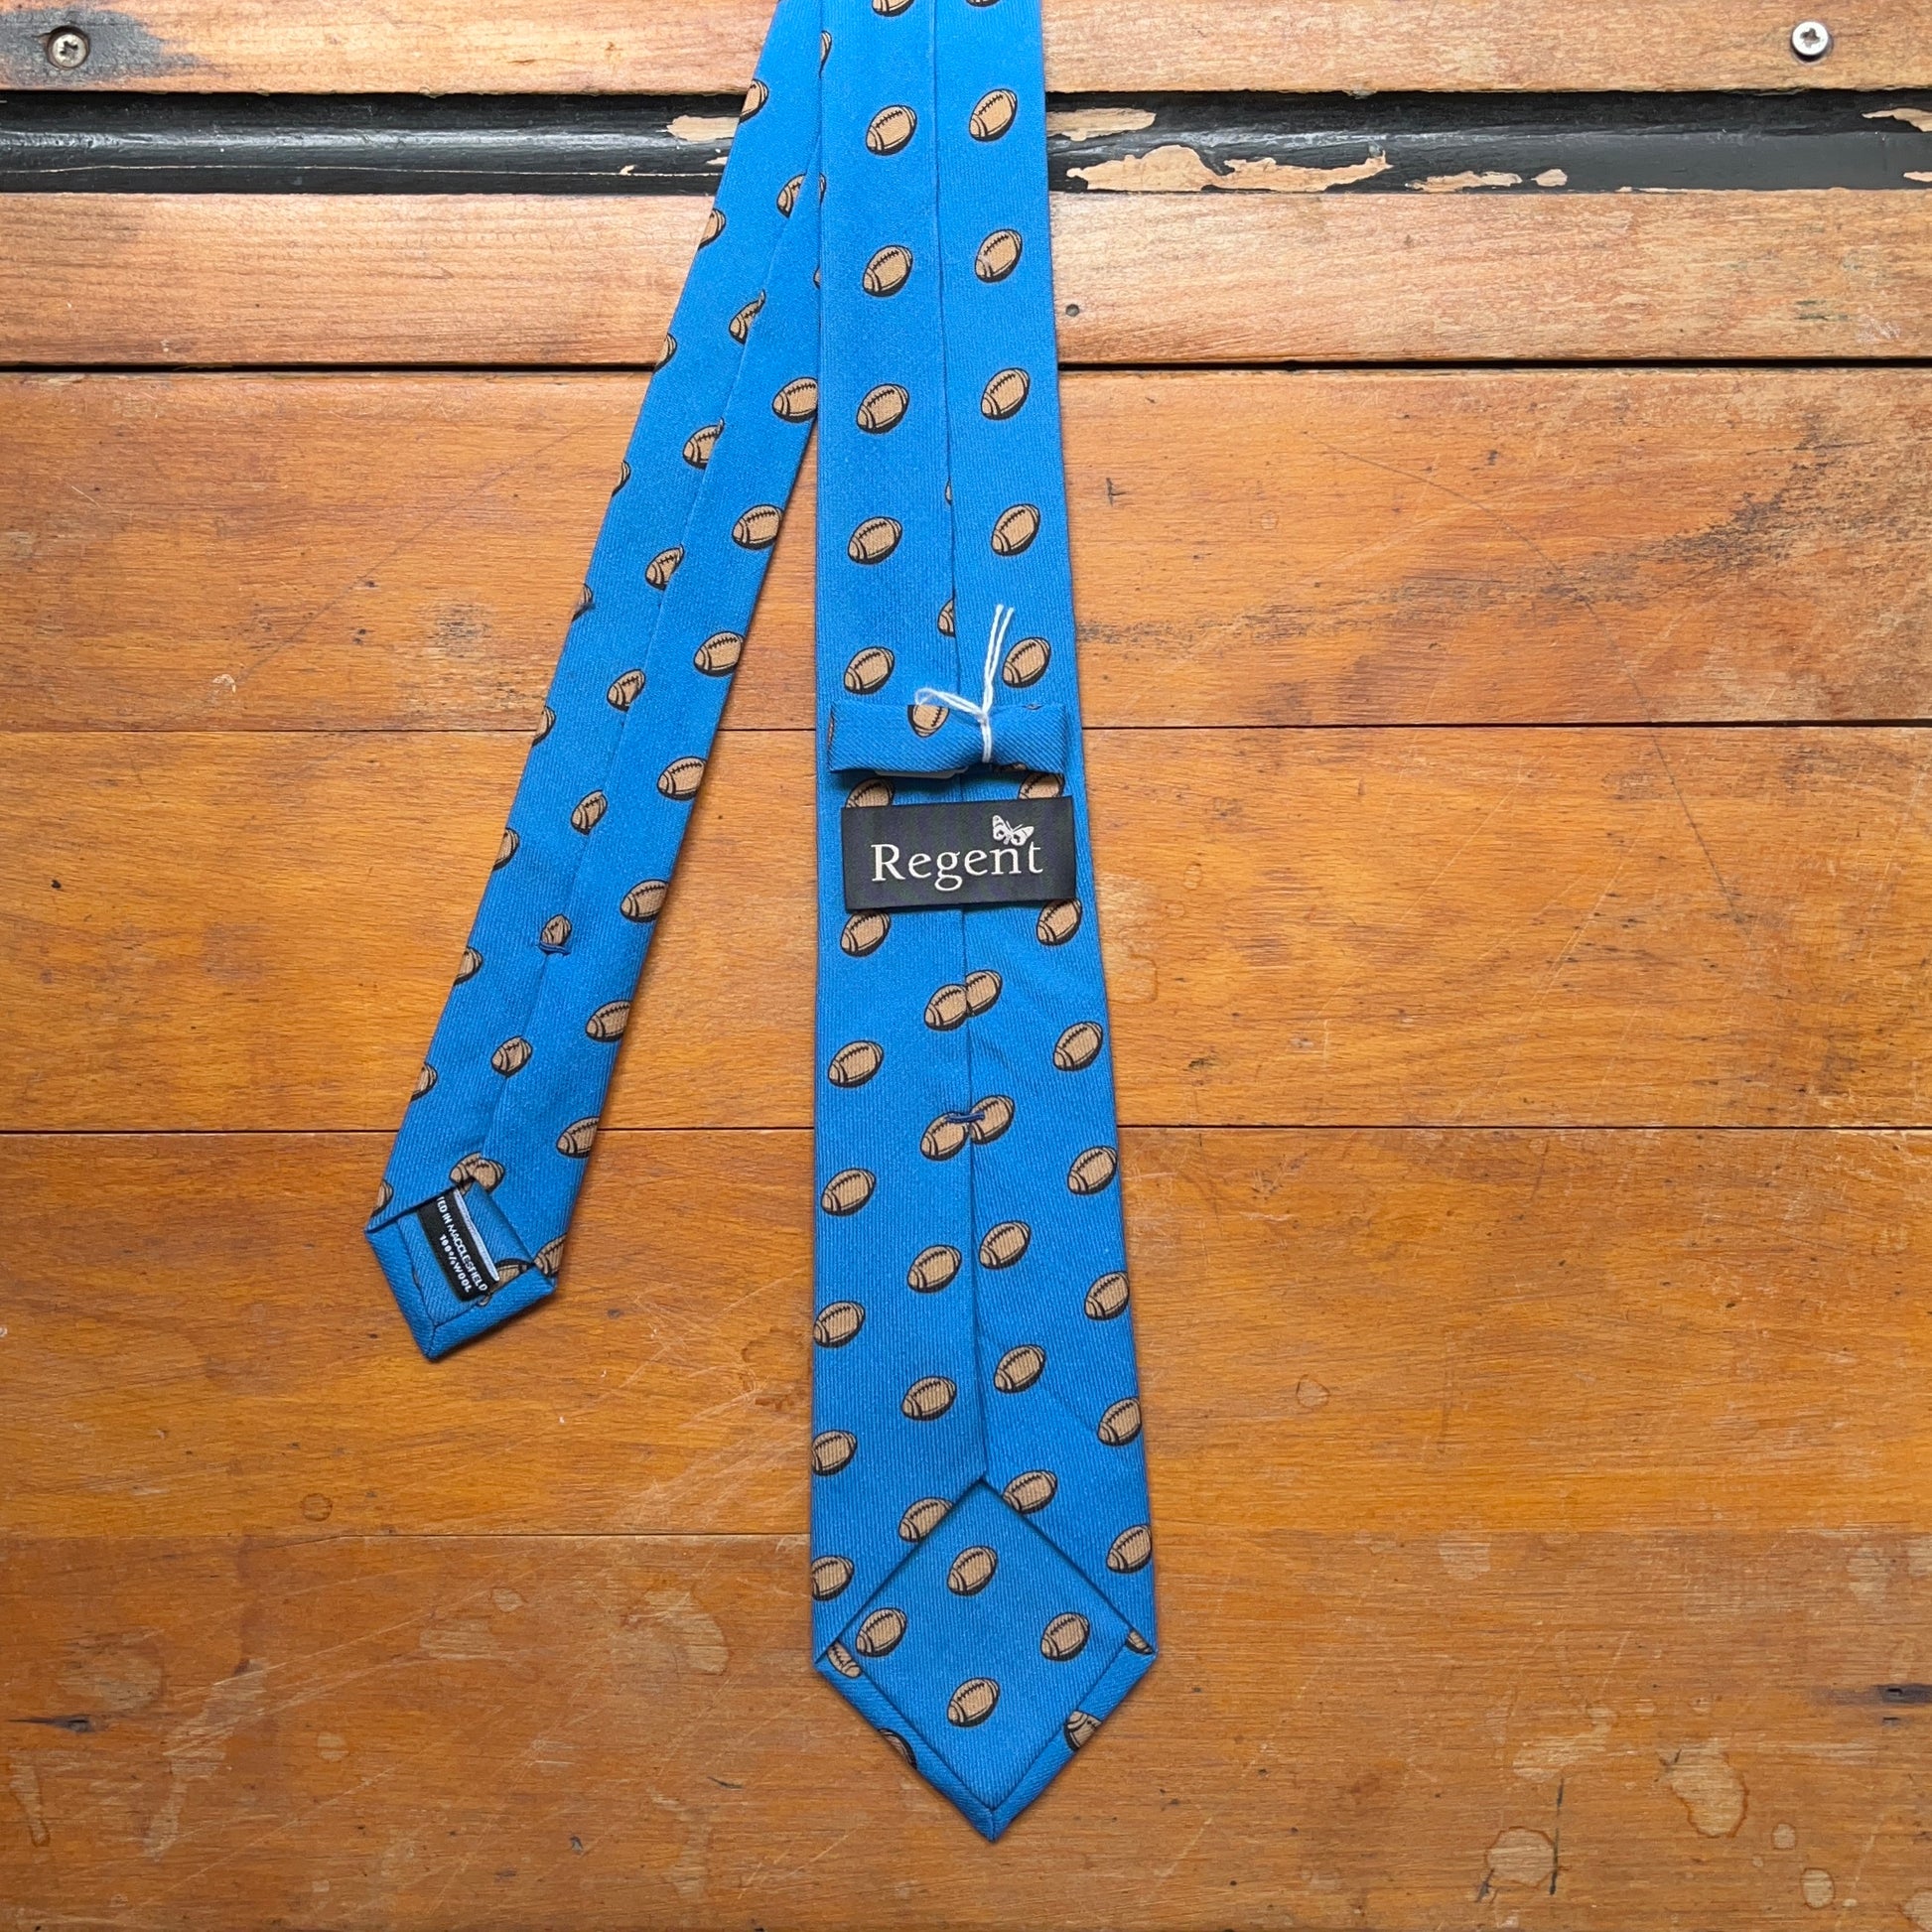 Blue regent tie made from woven wool with rugby ball print pattern - reverse